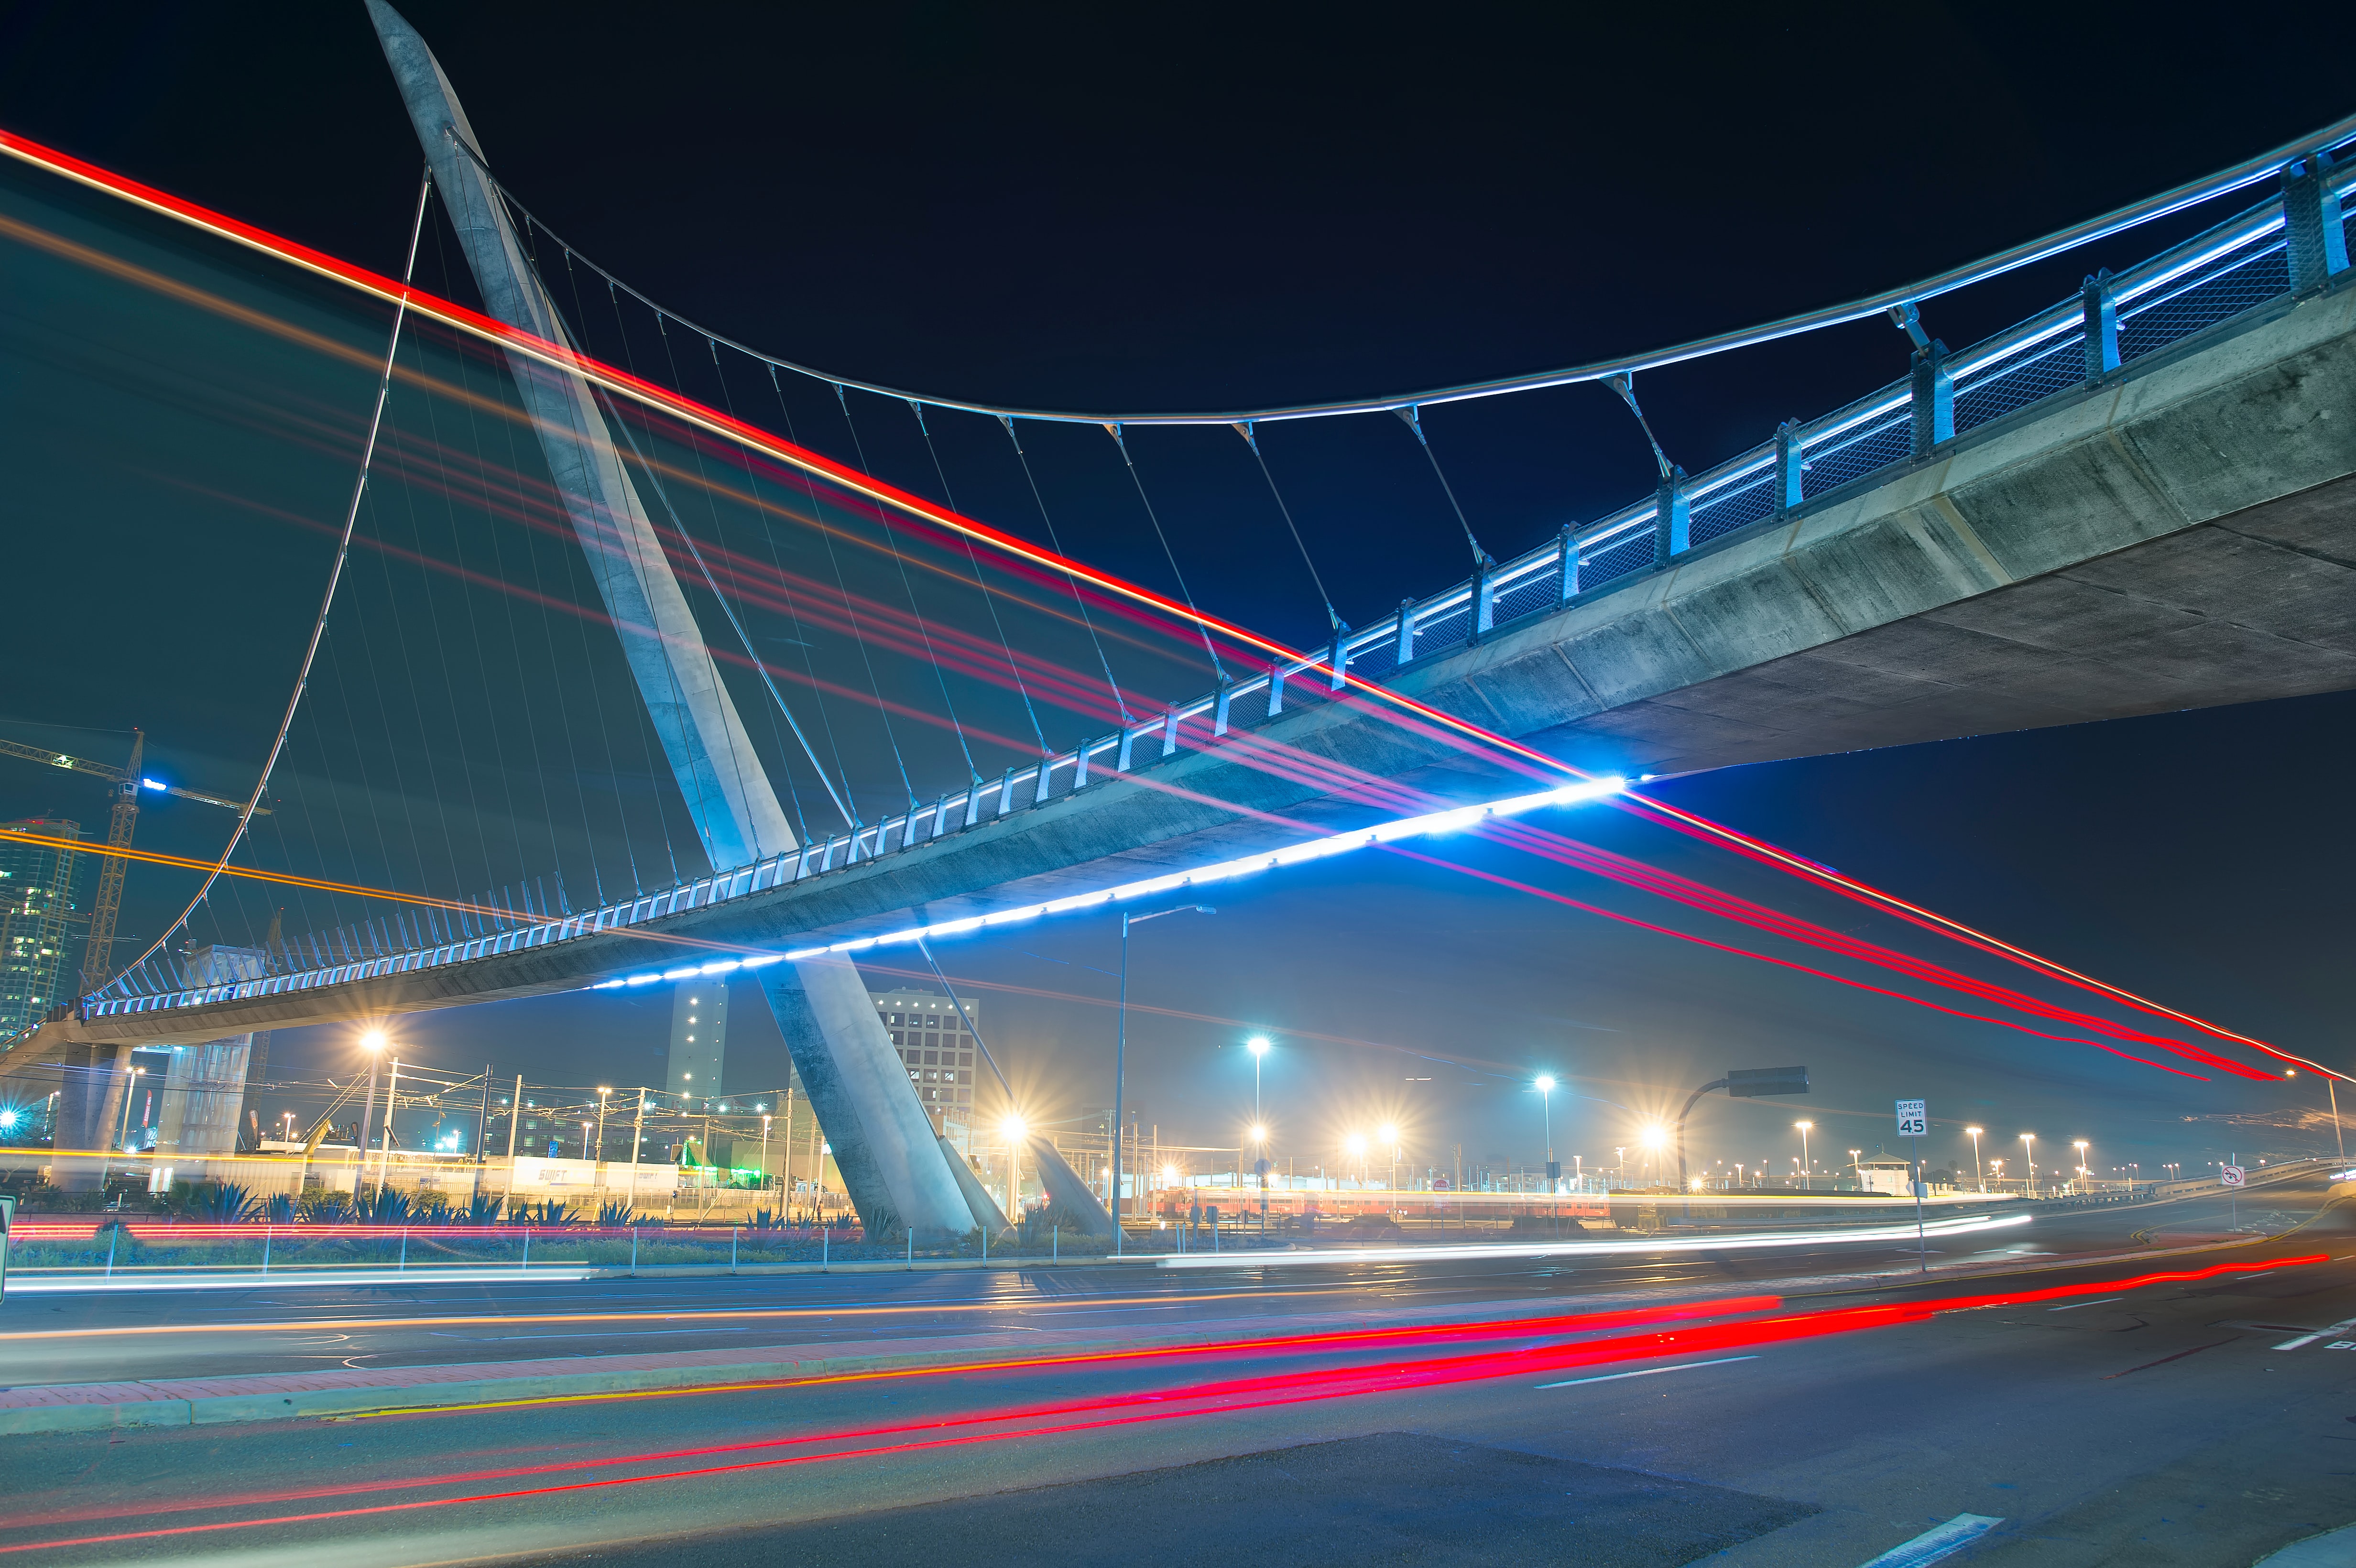 A lit pedestrian bridge in San Diego is pictured at night time. A long exposure leaves tail lights from cars streaking across the photograph's canvas.